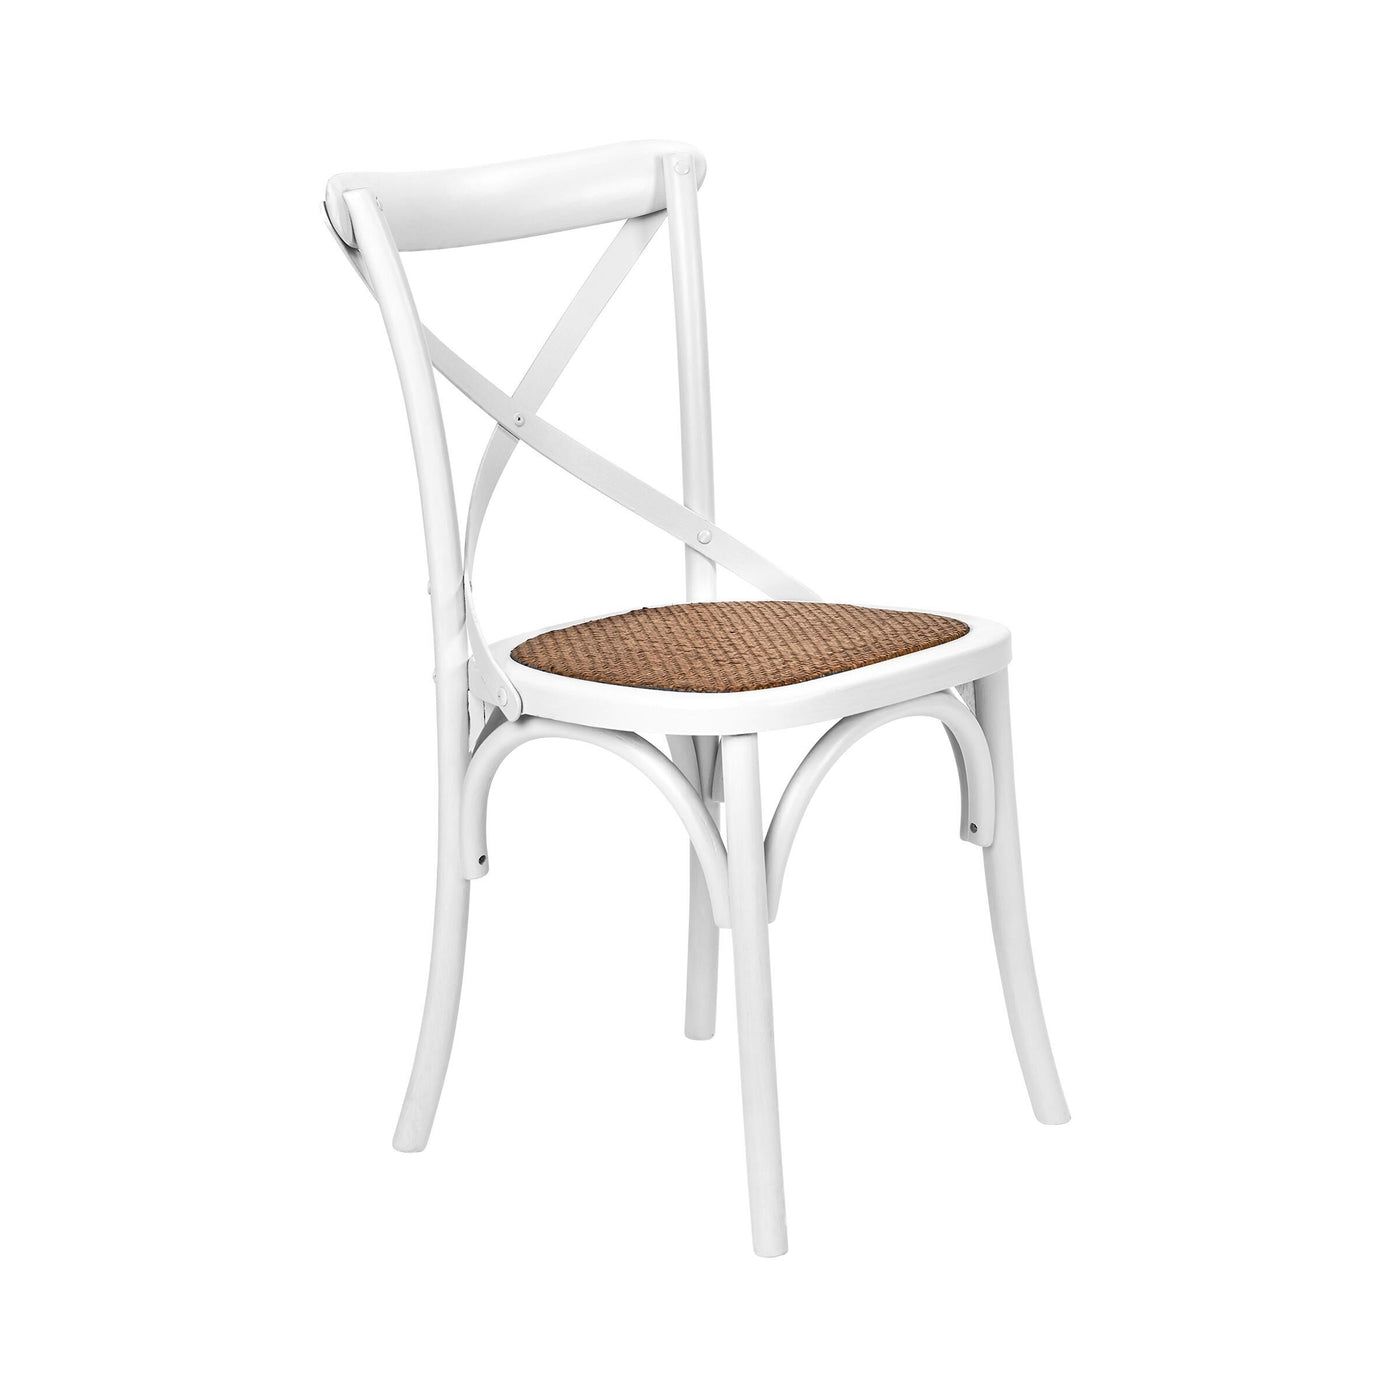 CROSS COUNTRY chair white